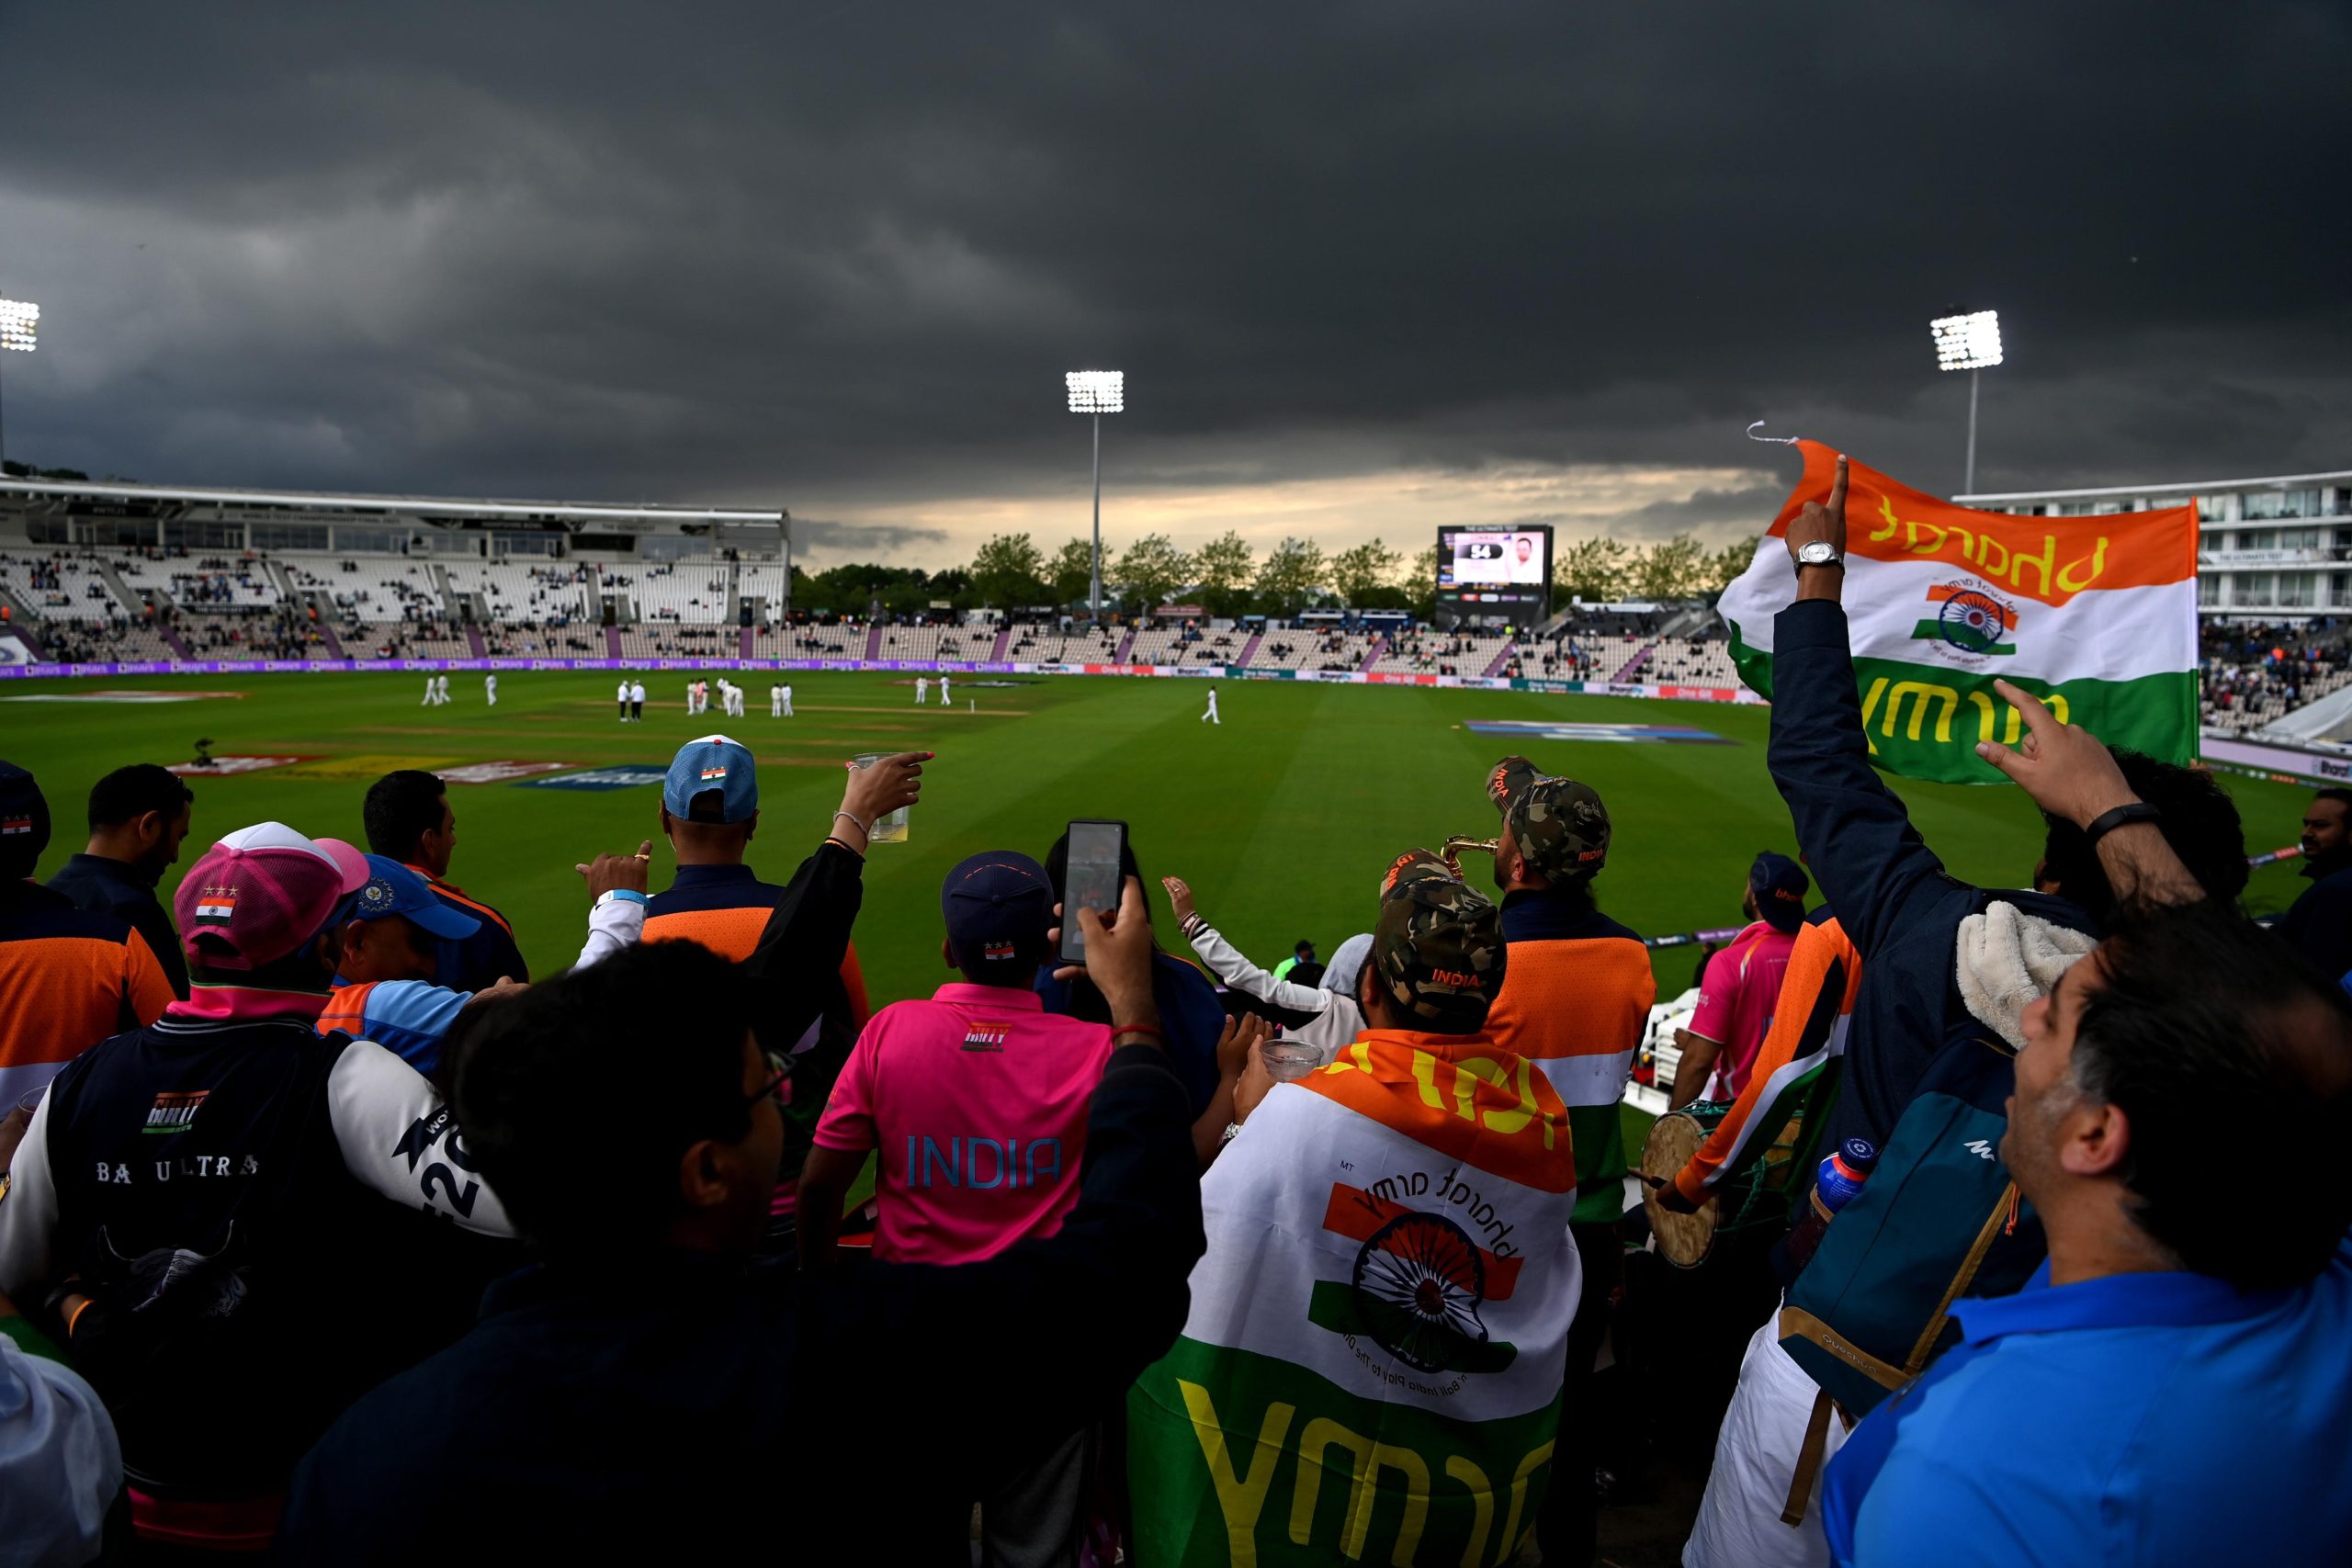 WTC Final Live: New Zealand players racially abused, Two fans removed from the Hampshire Bowl